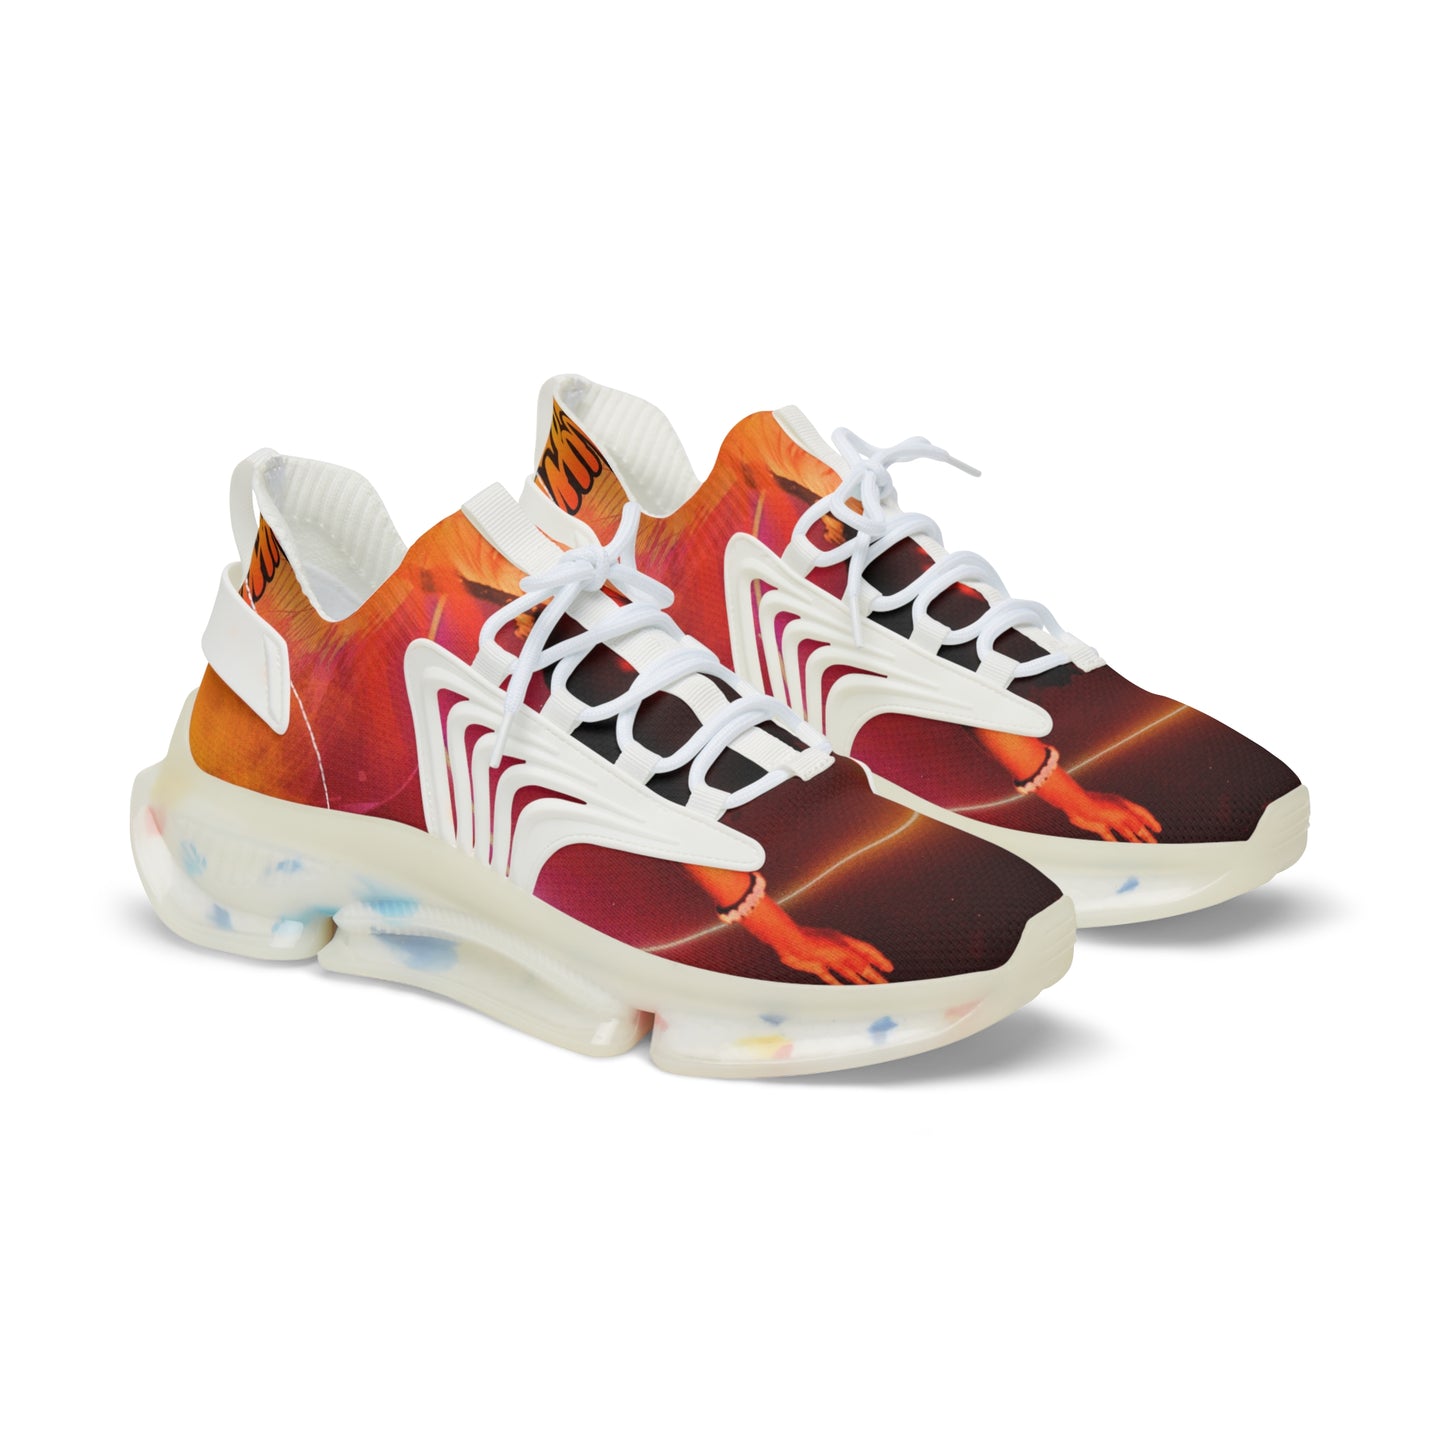 Fire and Desire Mesh Sneakers